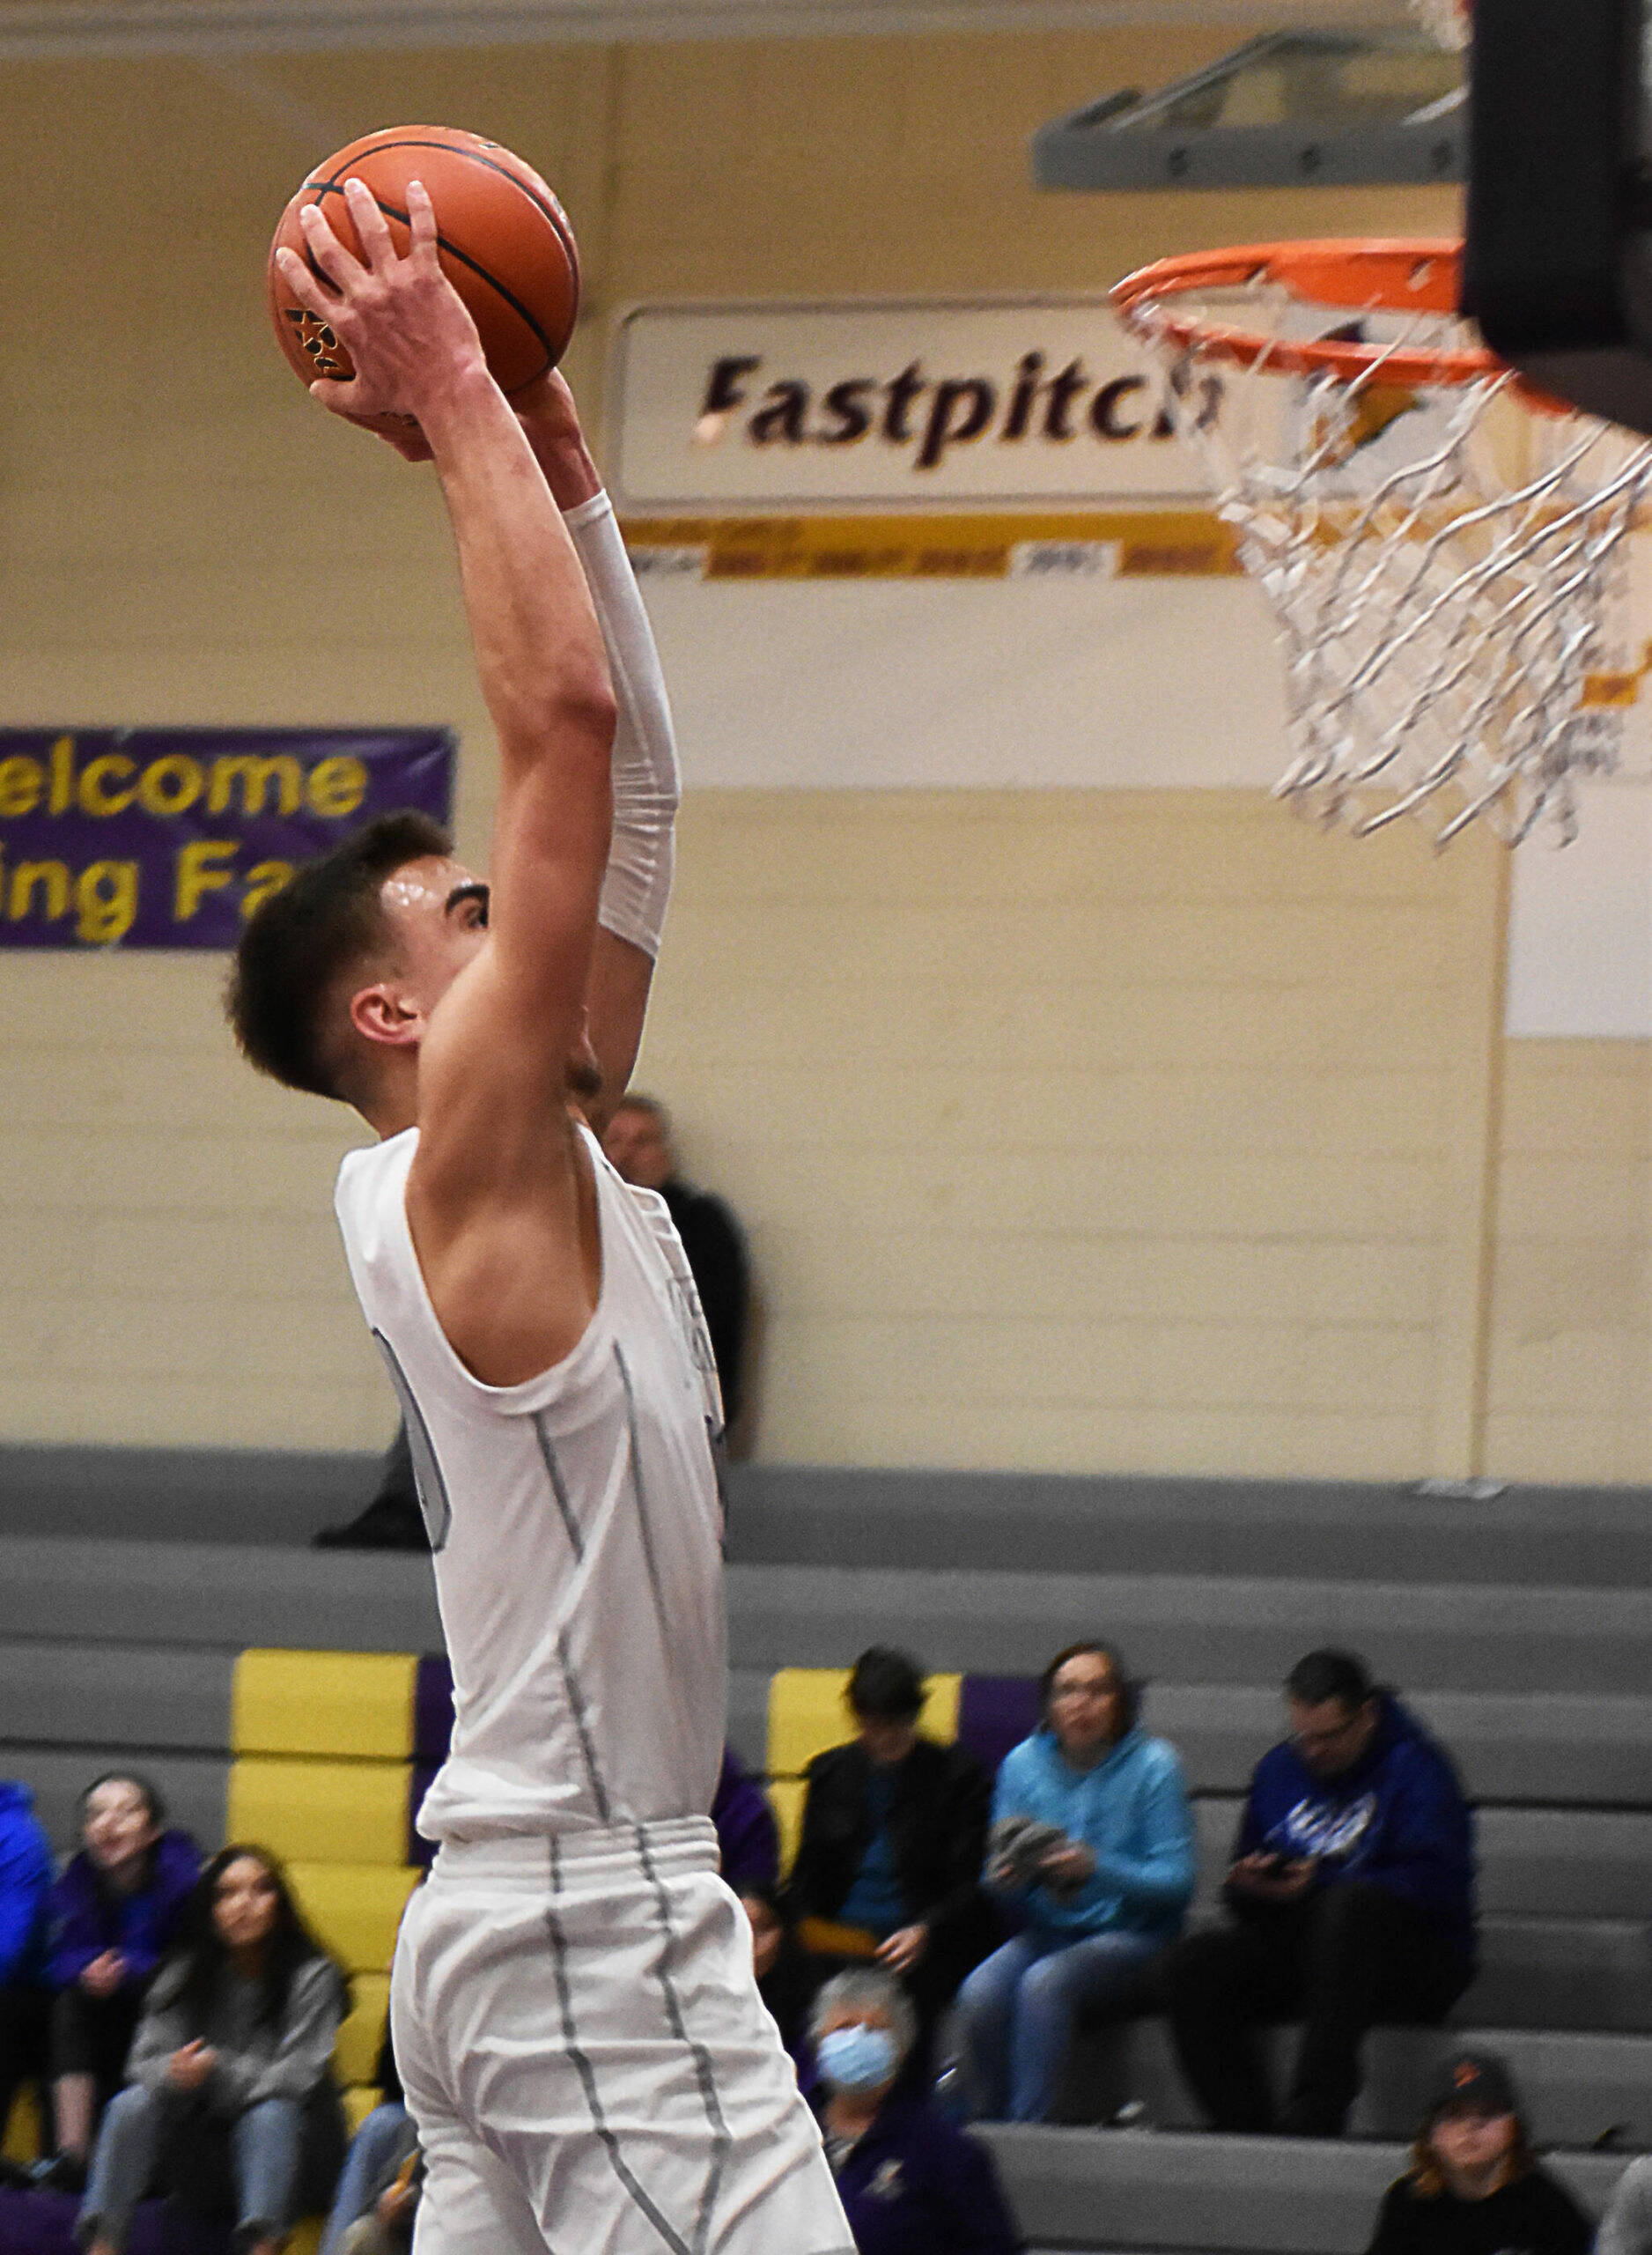 Cade Orness led the Vikings with 23 points.